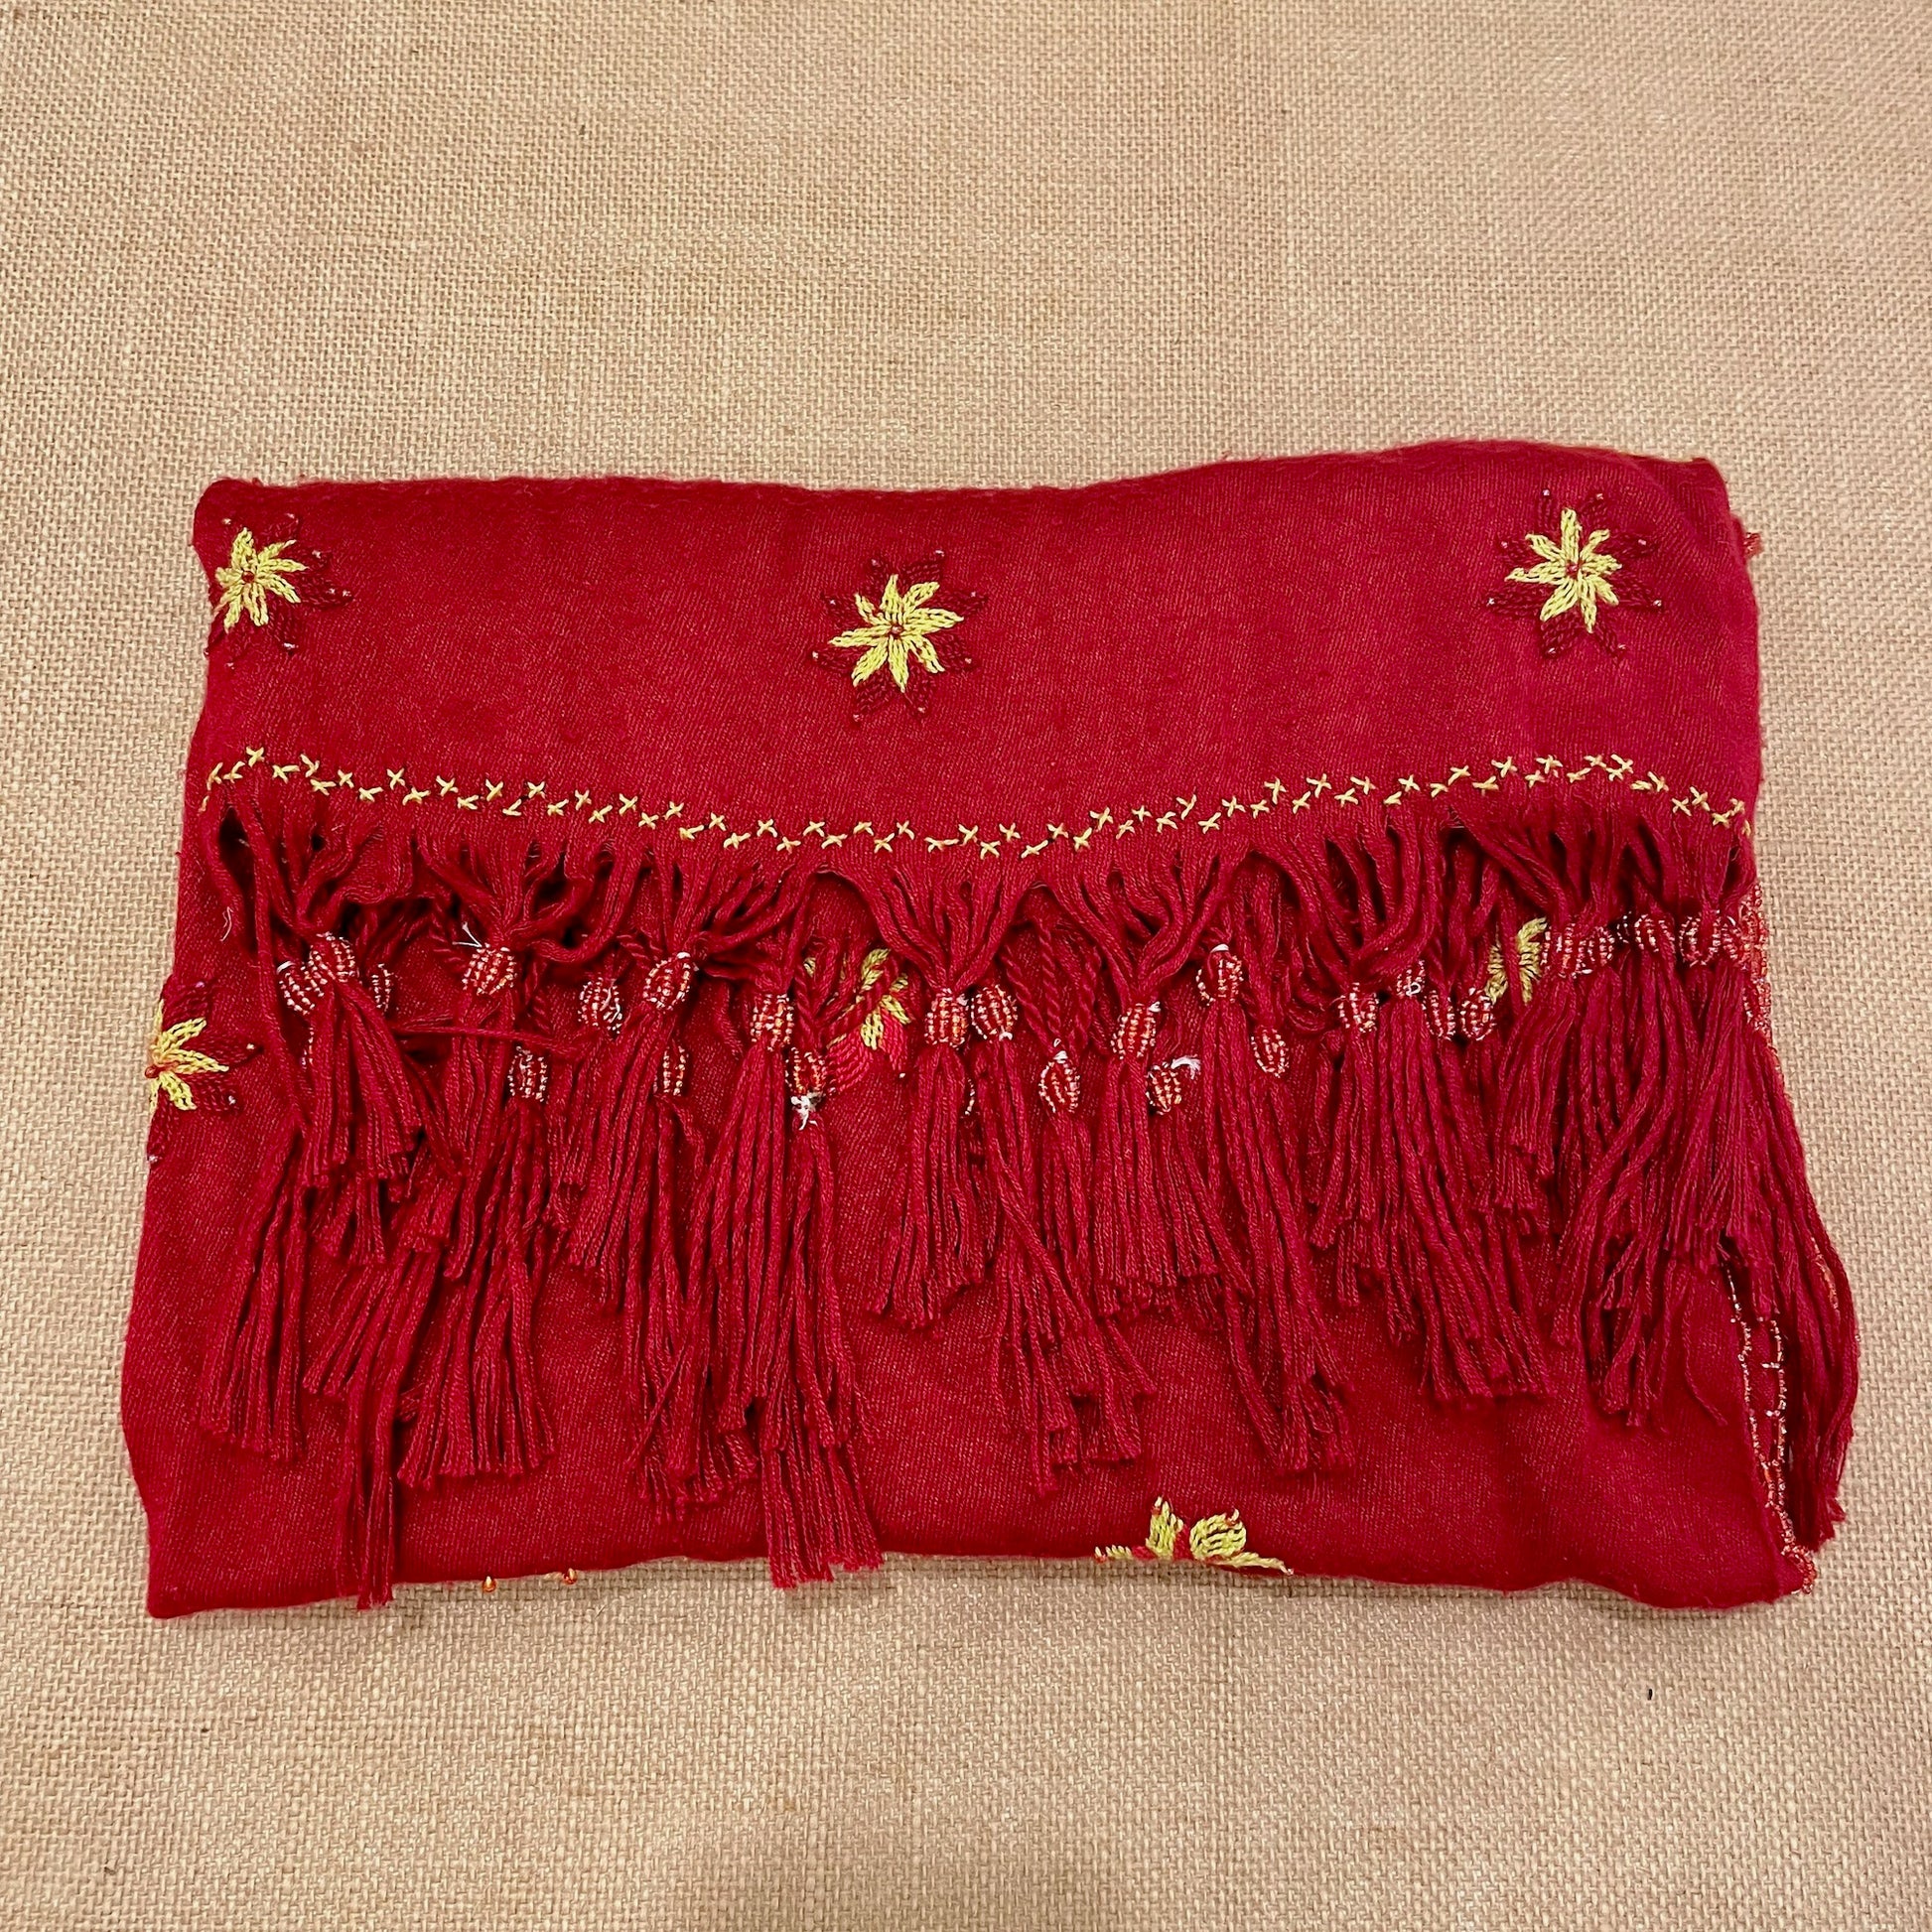 Bedouin Hand-embroidered Red Pashmina Scarf folded